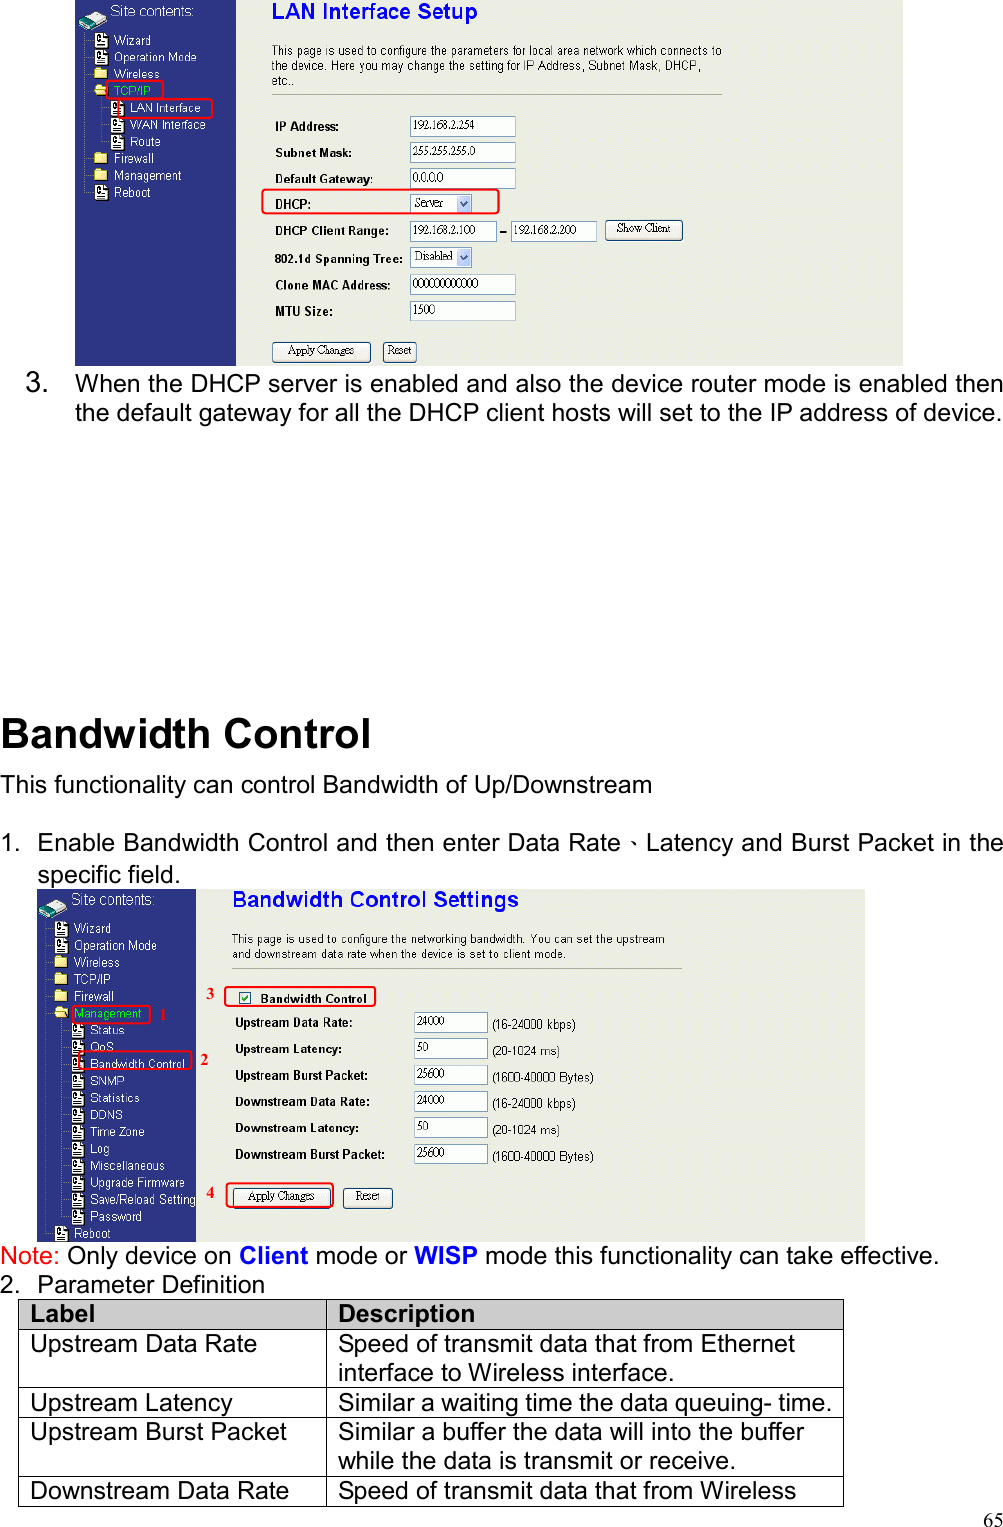  65 3.  When the DHCP server is enabled and also the device router mode is enabled then the default gateway for all the DHCP client hosts will set to the IP address of device.          Bandwidth Control This functionality can control Bandwidth of Up/Downstream  1.  Enable Bandwidth Control and then enter Data Rate、Latency and Burst Packet in the specific field.  Note: Only device on Client mode or WISP mode this functionality can take effective. 2. Parameter Definition Label  Description Upstream Data Rate  Speed of transmit data that from Ethernet interface to Wireless interface. Upstream Latency  Similar a waiting time the data queuing- time. Upstream Burst Packet  Similar a buffer the data will into the buffer while the data is transmit or receive.     Downstream Data Rate  Speed of transmit data that from Wireless 1 23 4 